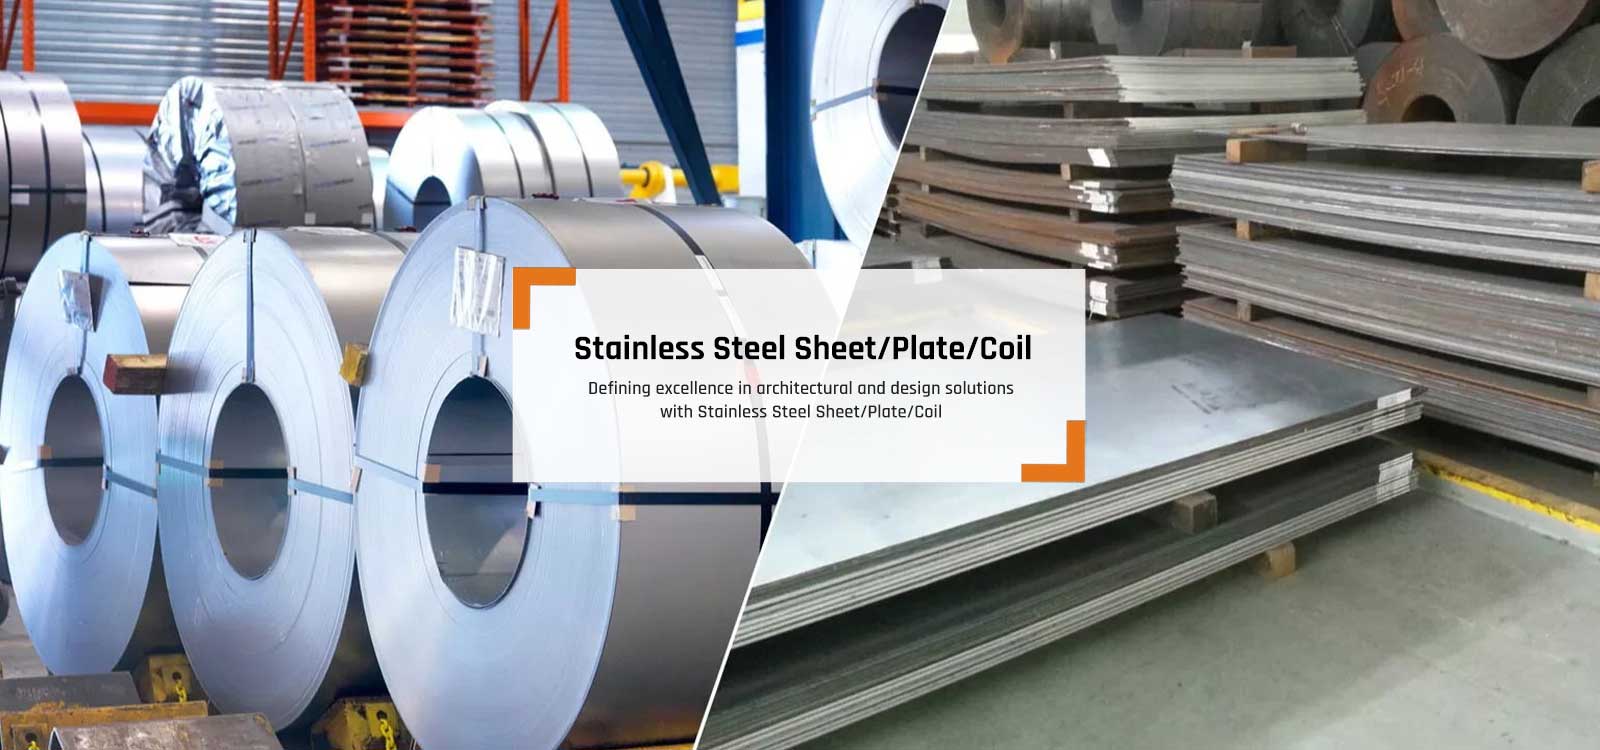 Stainless Steel Sheet Plates Coils Manufacturers in India